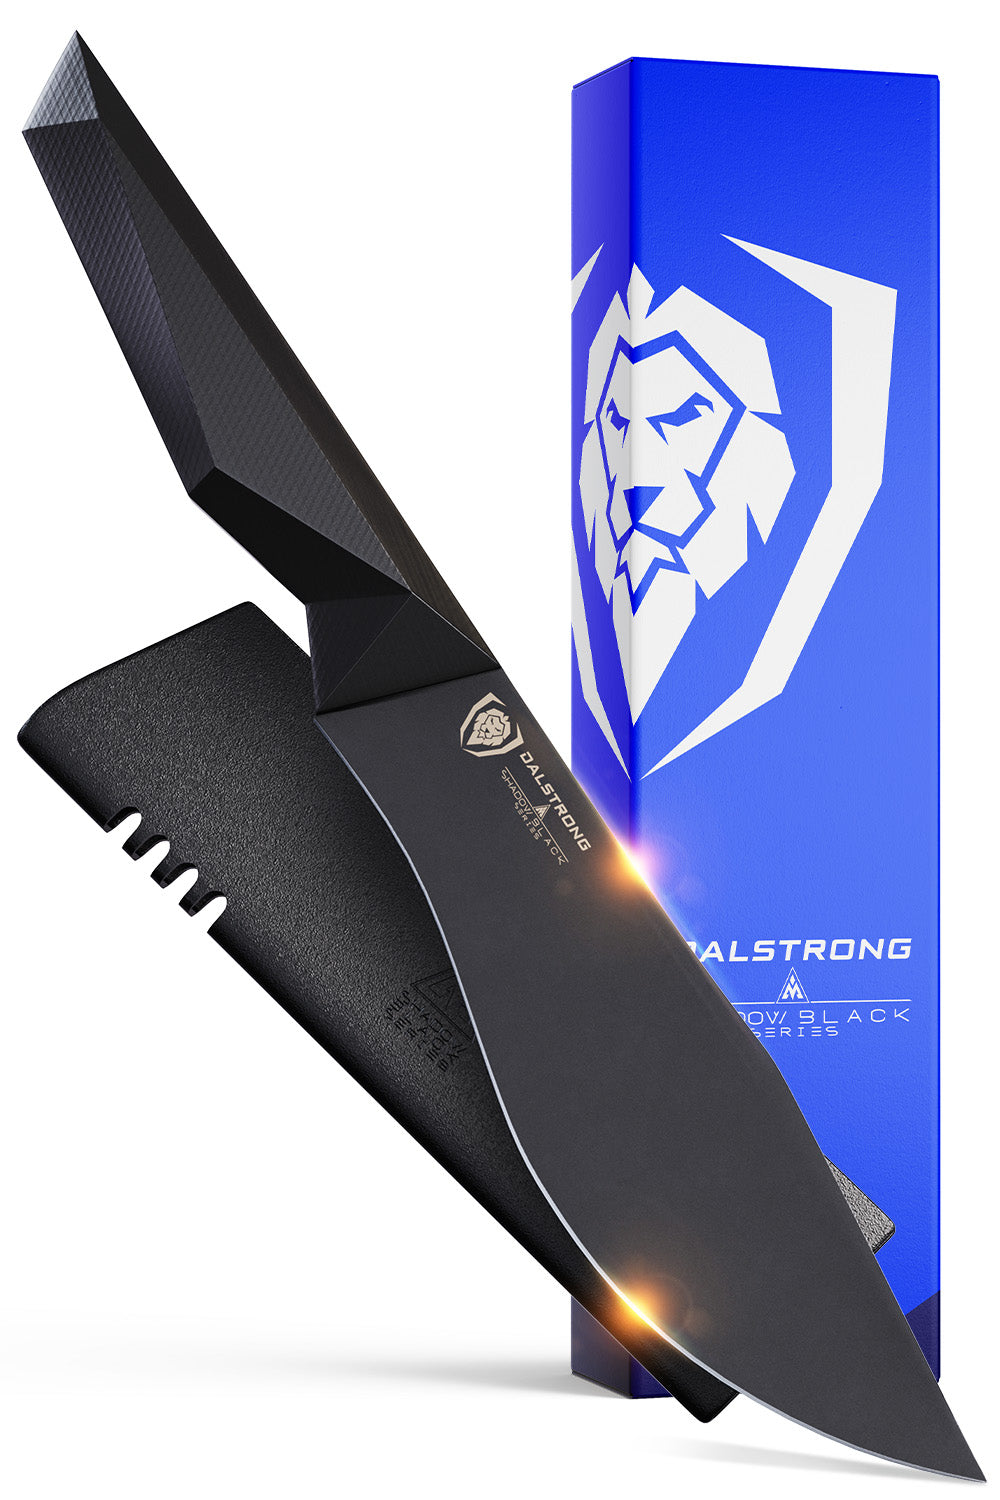 Chef's-Cleaver Hybrid "Barong" Knife 7" | Shadow Black Series | NSF Certified | Dalstrong ©